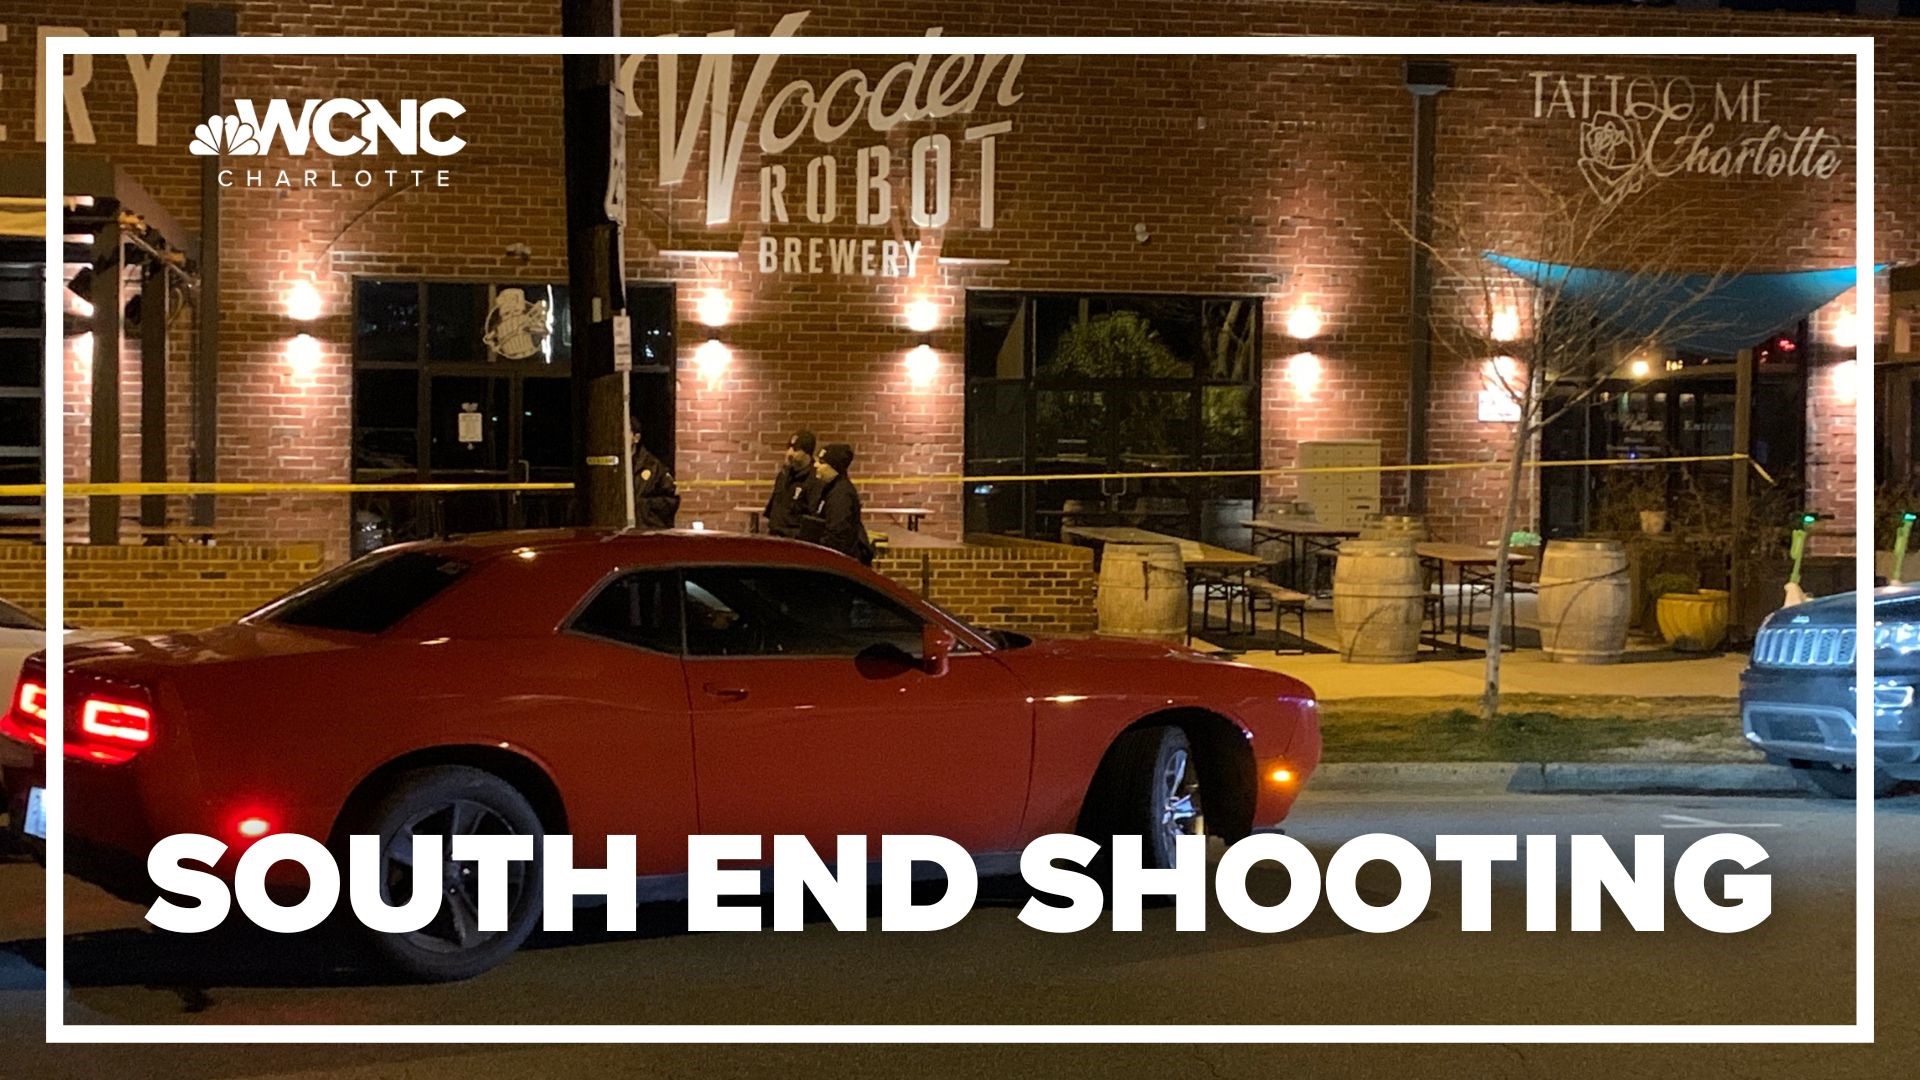 Two people were killed in an apparent ambush outside a popular brewery in Charlotte's South End Monday night, police said.